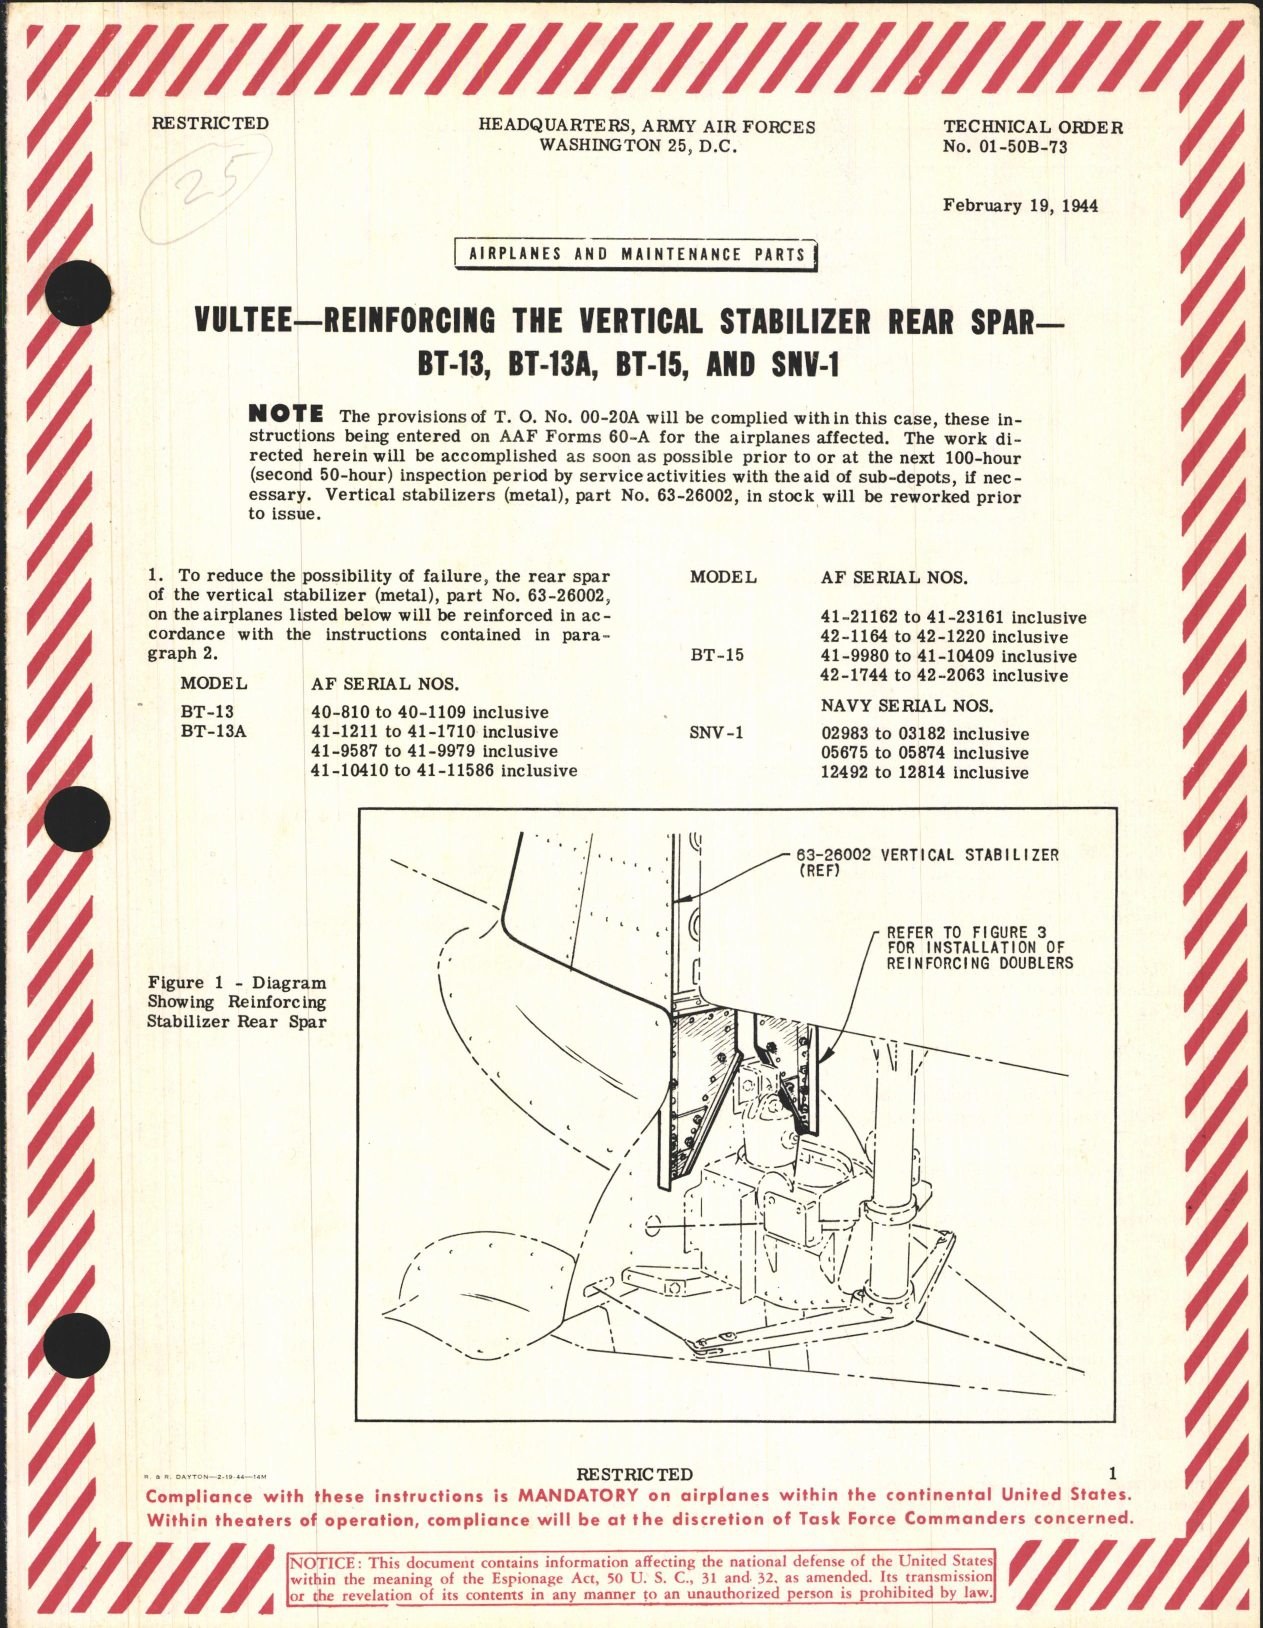 Sample page 1 from AirCorps Library document: Reinforcing the Vertical Stabilizer Rear Spar for BT-13, BT-13A, BT-15, and SNV-1